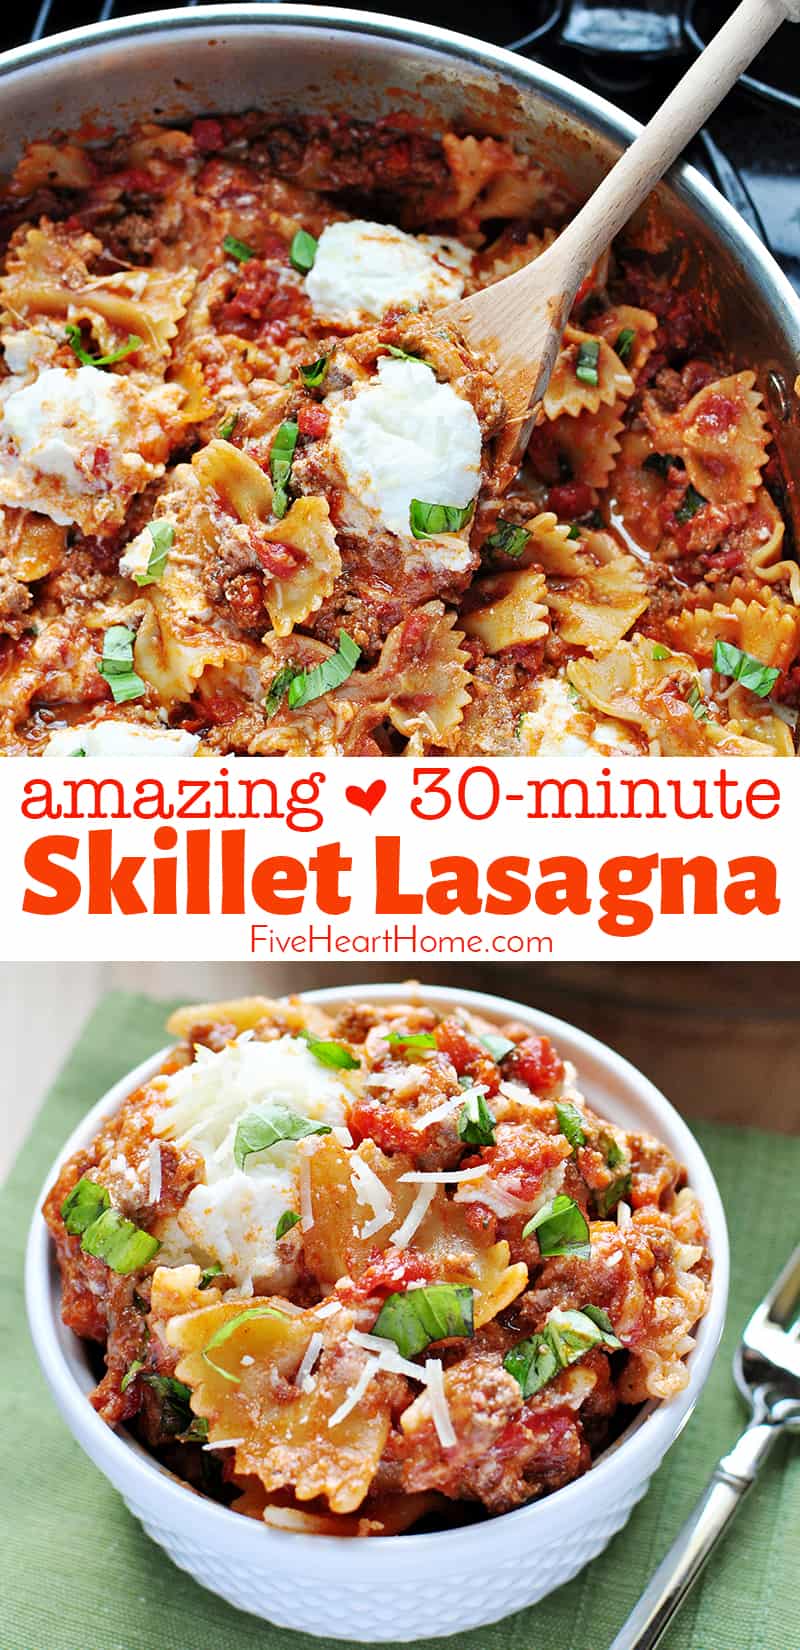 Skillet Lasagna, two-photo collage with text.